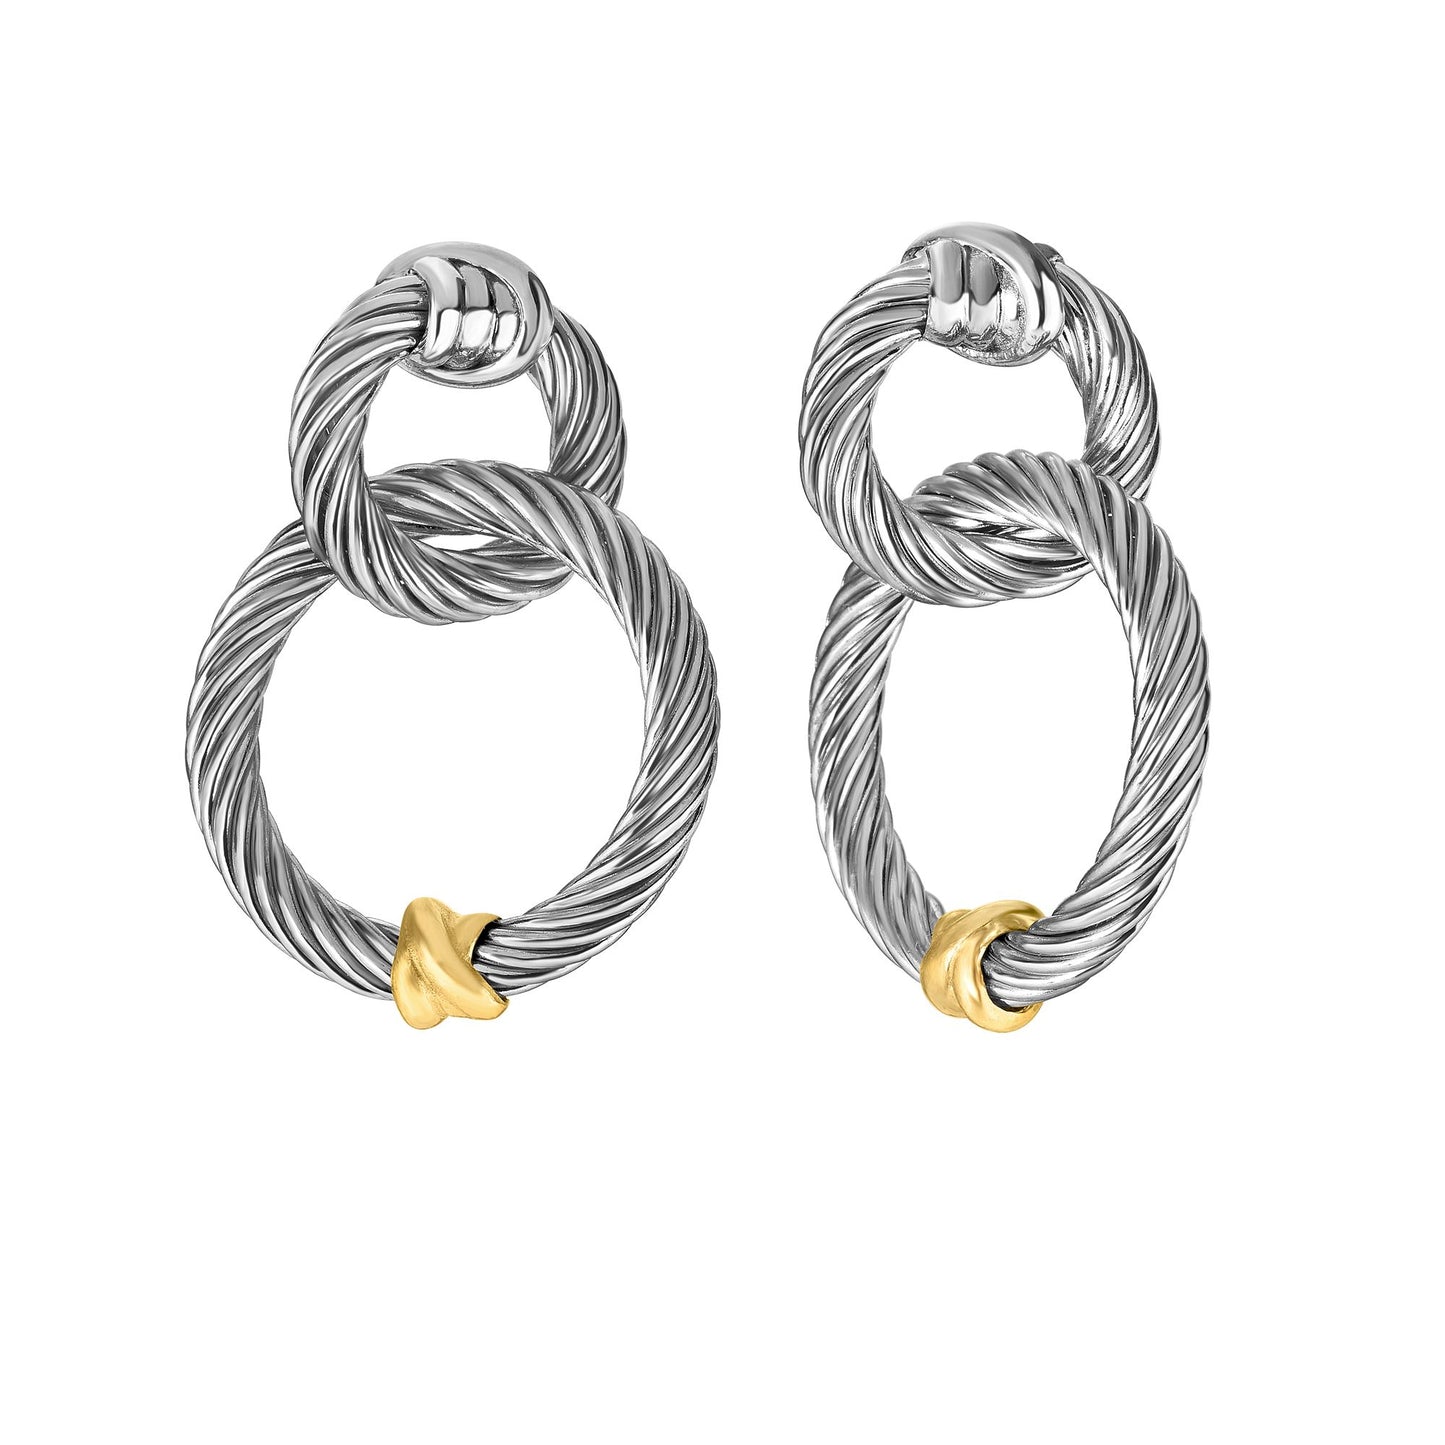 18K Yellow Gold and Silver Italian Cable Earring with Push Back Clasp